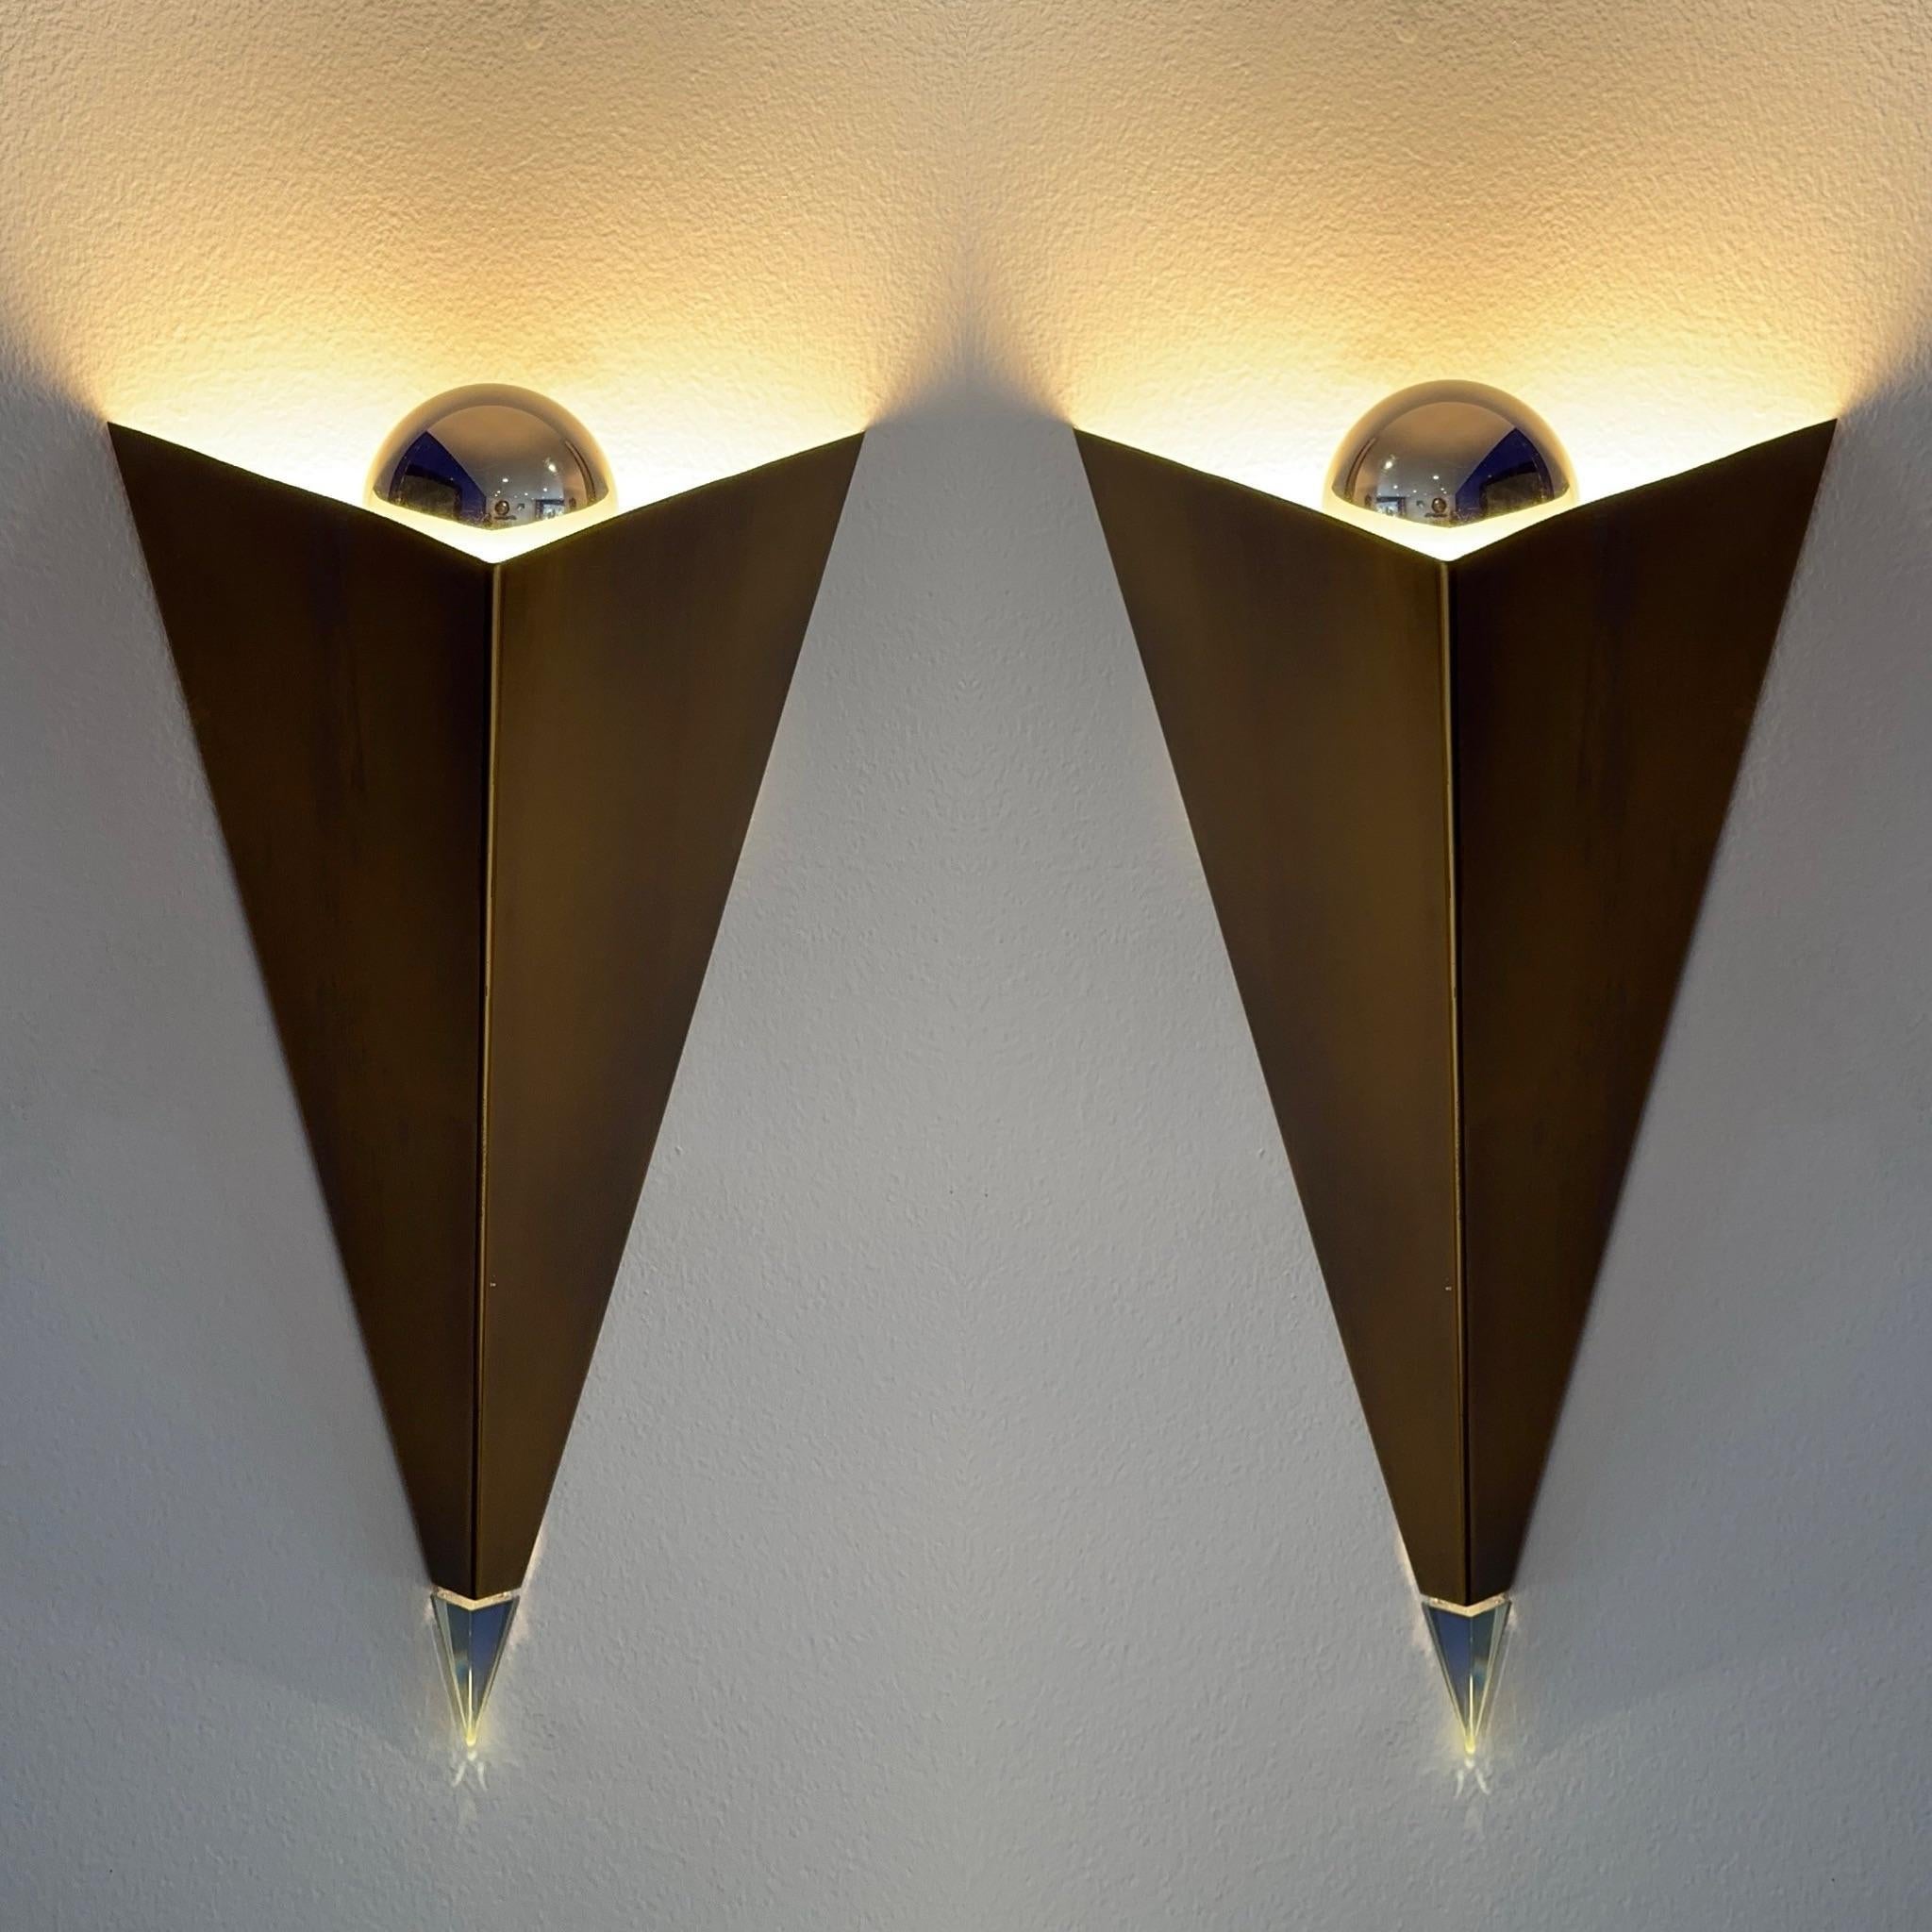 Late 20th Century designed in the postmodern idiom sconces. The pyramid body is finished in brass with a light green glass finial at the bottom of the pyramid and a chrome sphere inside the pyramid to diffuse the light. They are in mint condition